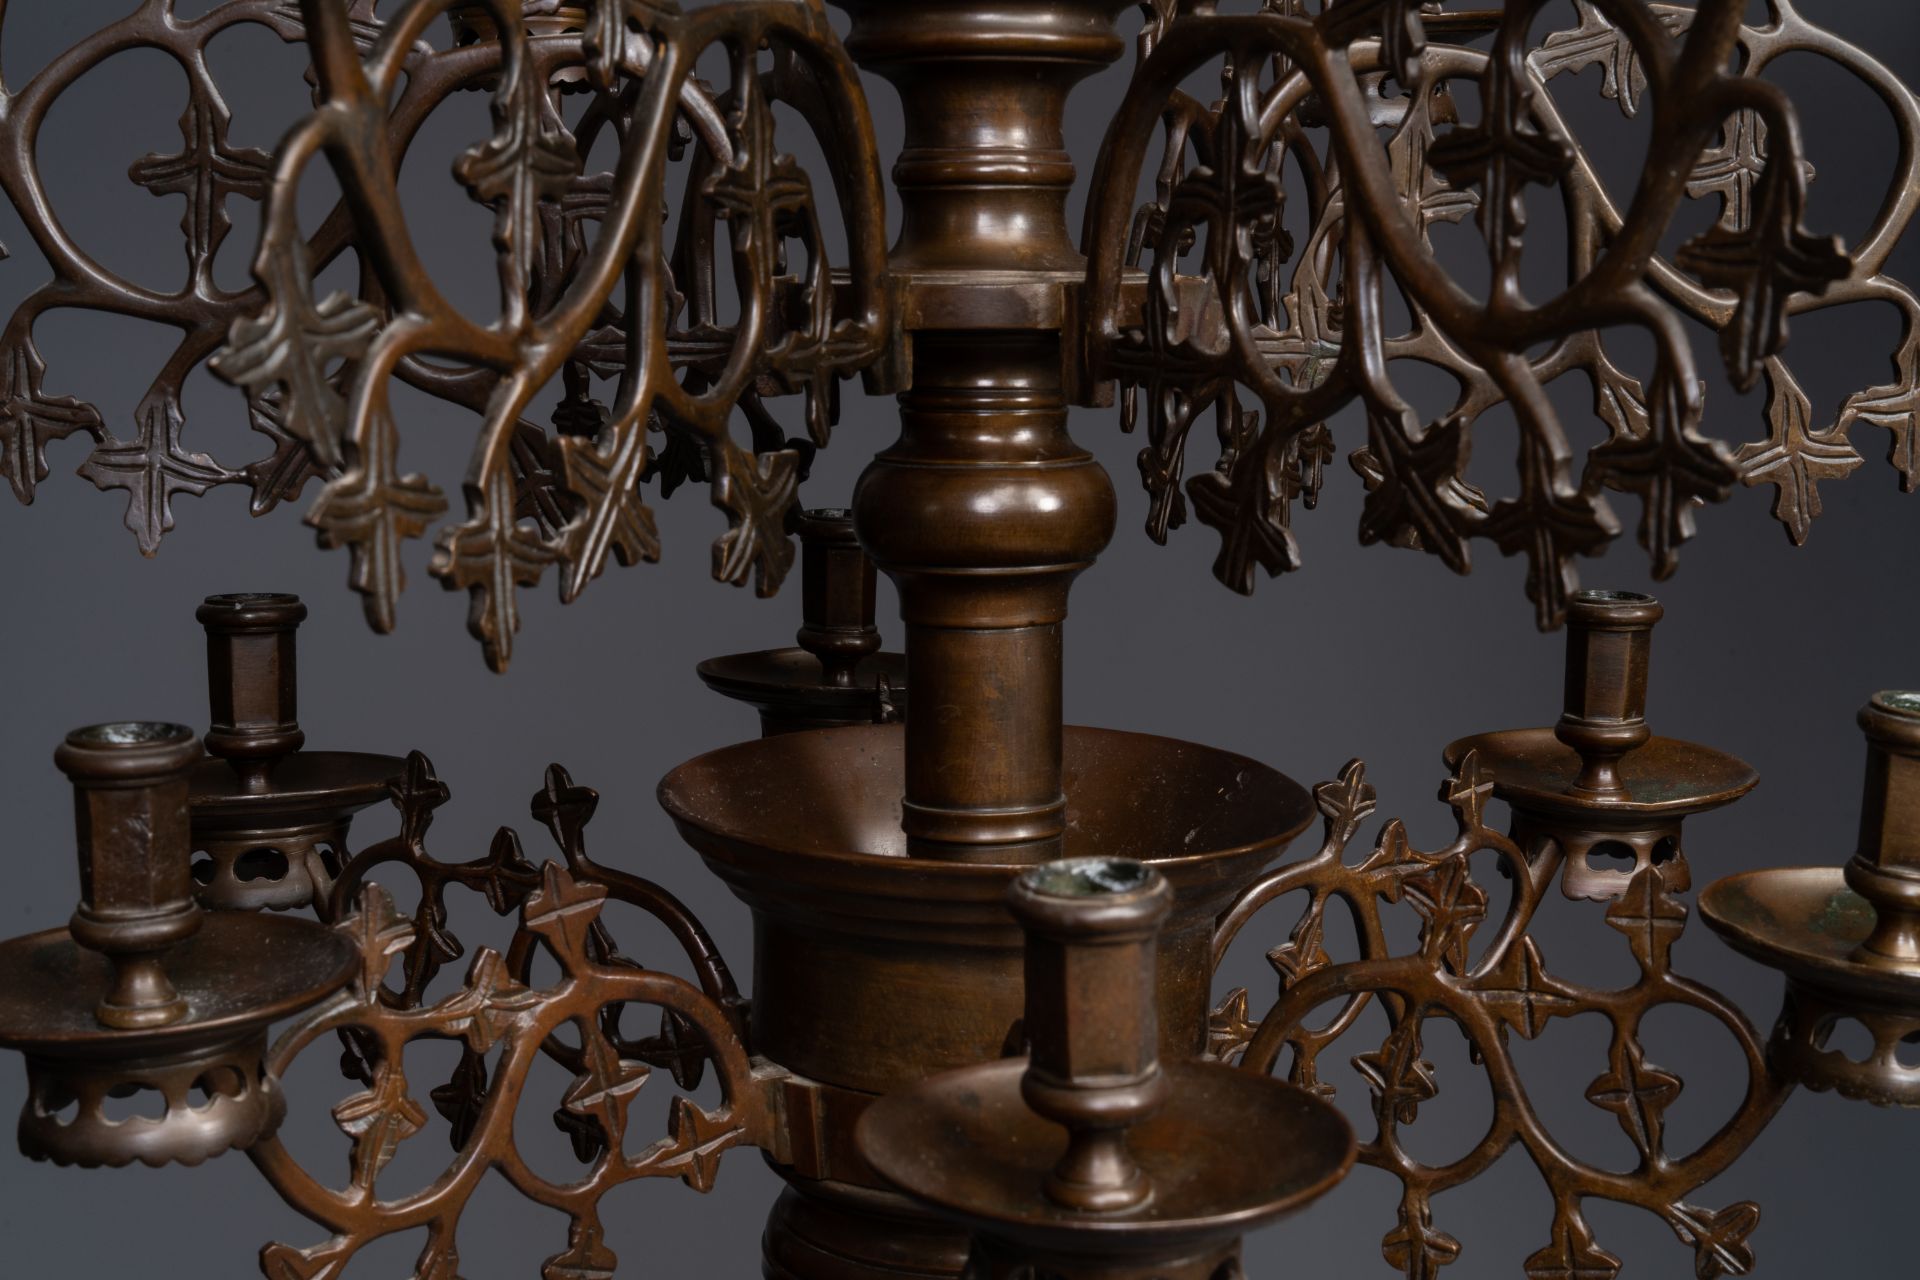 A Flemish or Dutch bronze Gothic Revival large bronze 'Madonna and Child' chandelier, 19th C. - Image 5 of 8